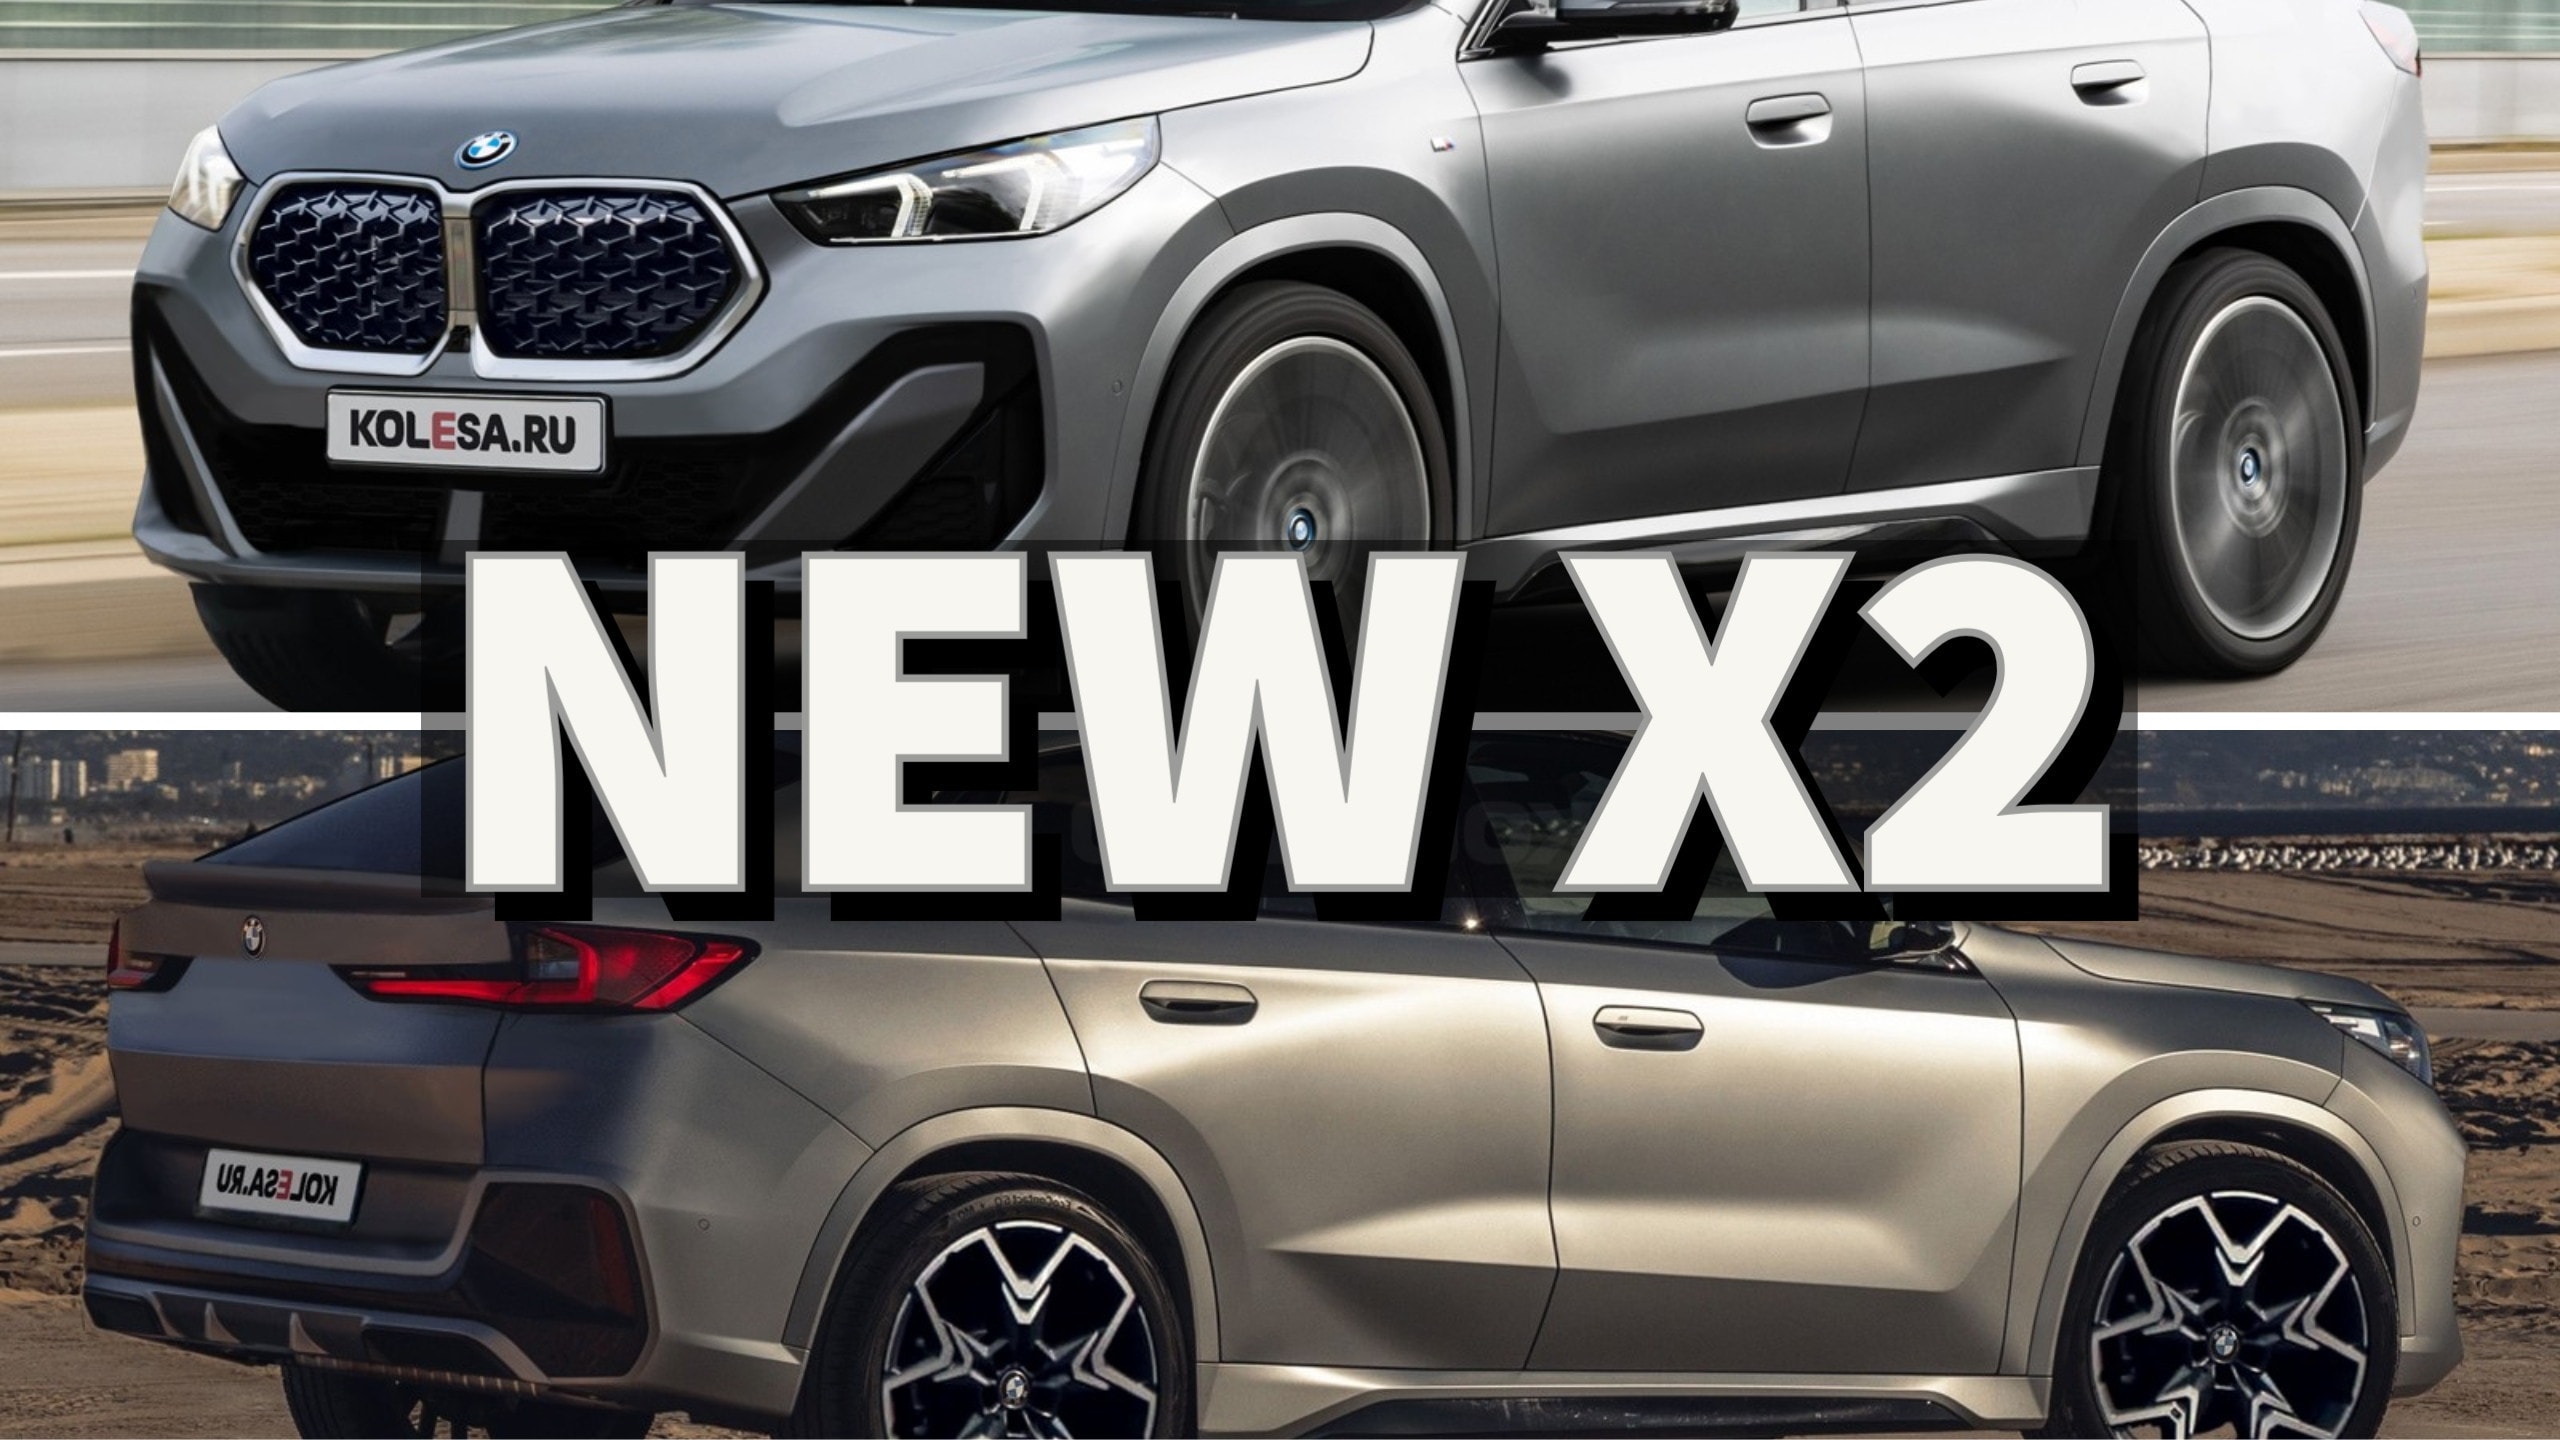 First look: BMW X2 creates whole new SUV line